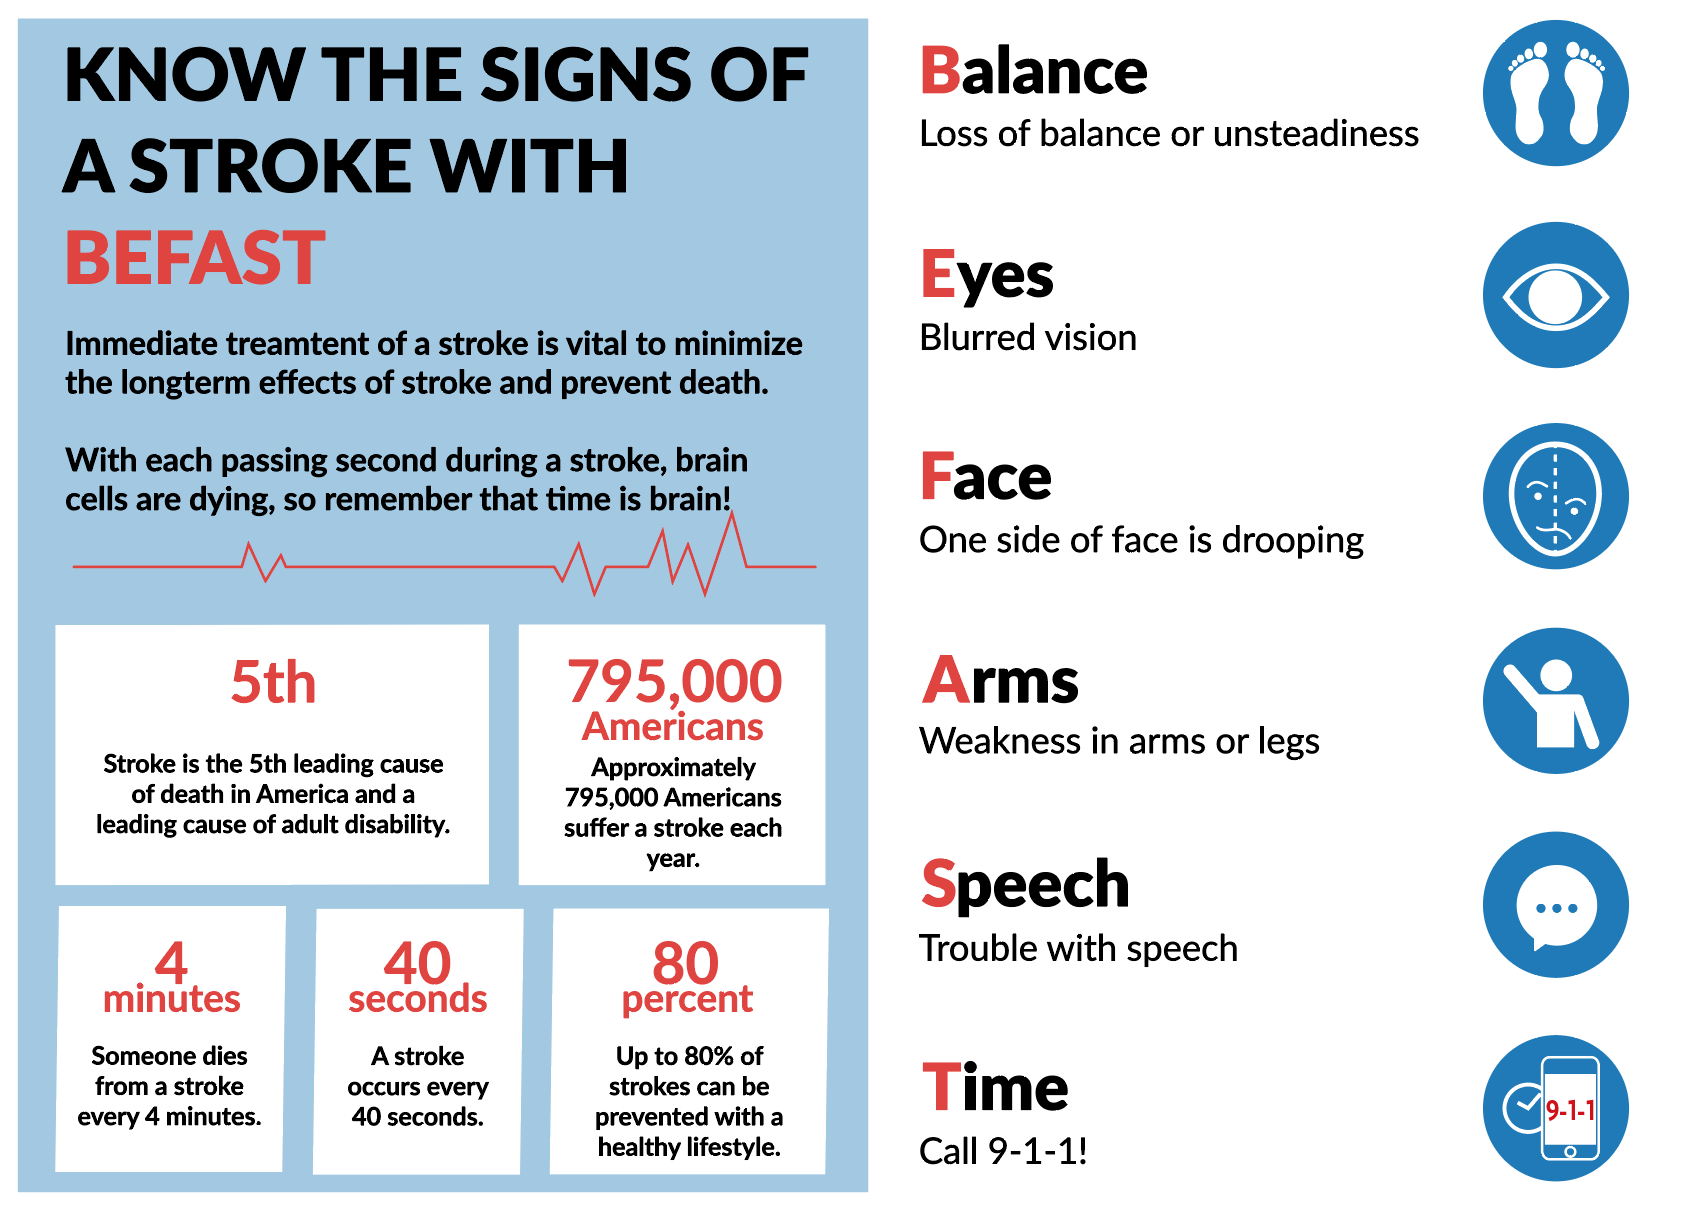 BEFAST Signs of stroke acronym Balance Eyes Face Arm Slurred Speech Time to call 911